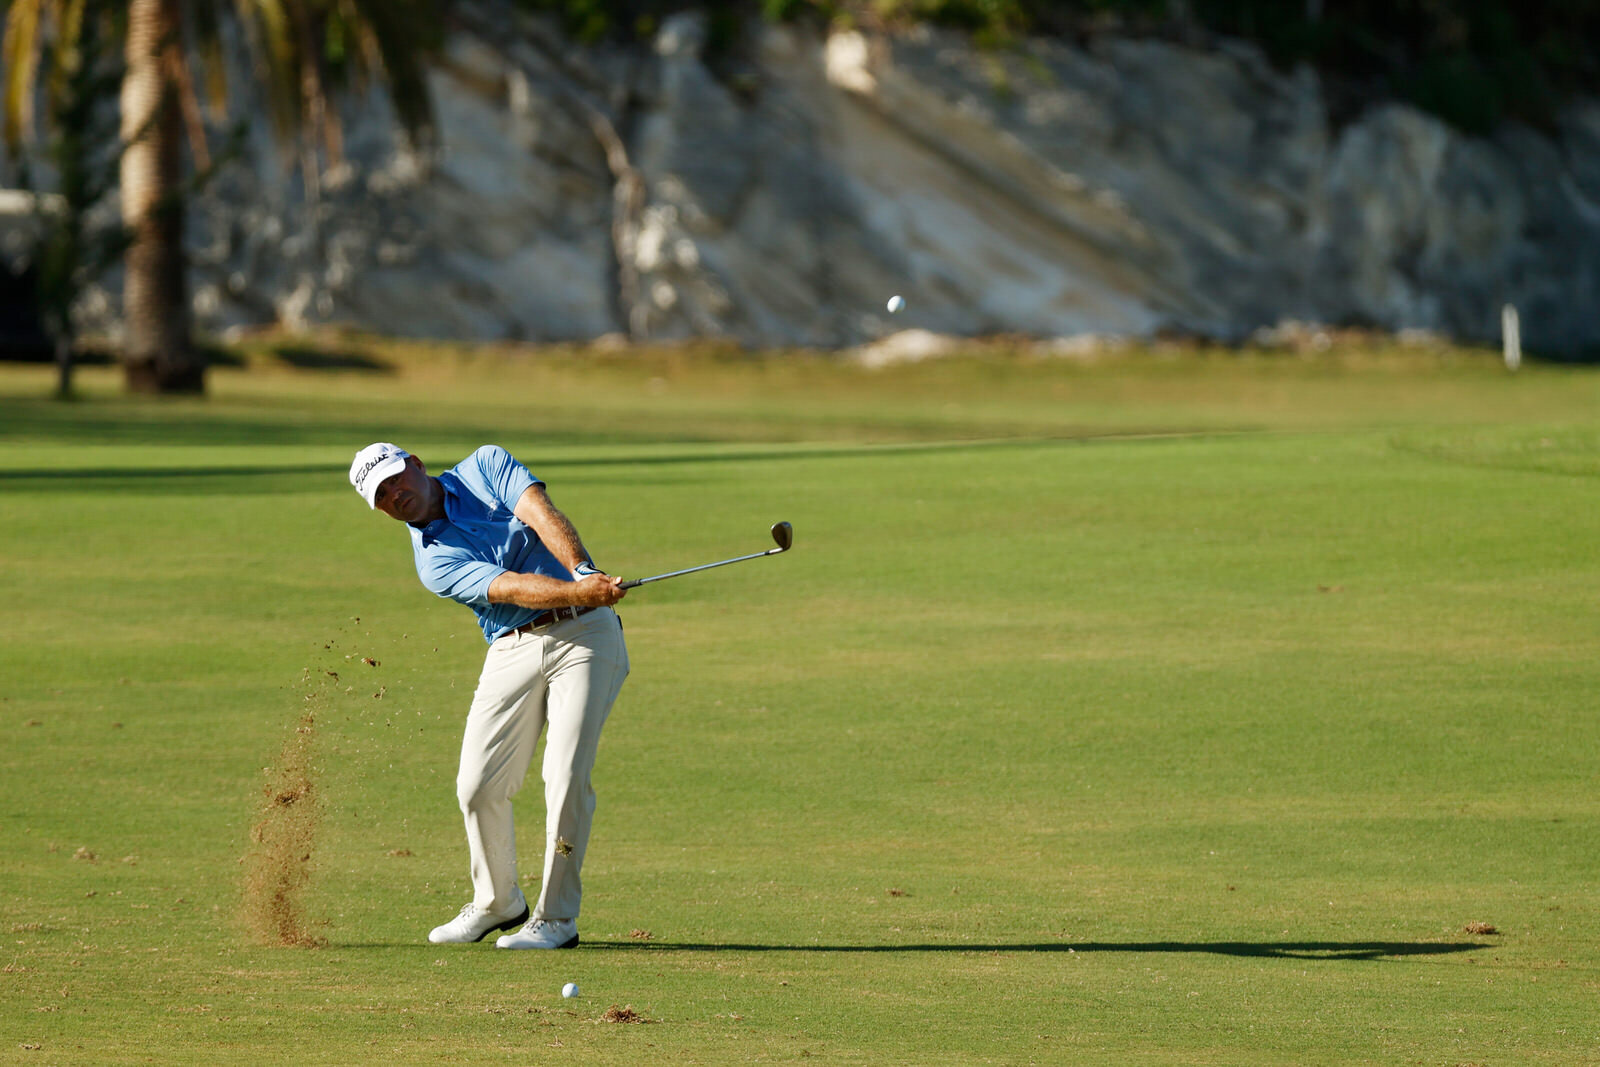  SOUTHAMPTON, BERMUDA - OCTOBER 29: Ryan Armour of the United States plays a shot on the fifth hole during the first round of the Bermuda Championship at Port Royal Golf Course on October 29, 2020 in Southampton, Bermuda. (Photo by Gregory Shamus/Get